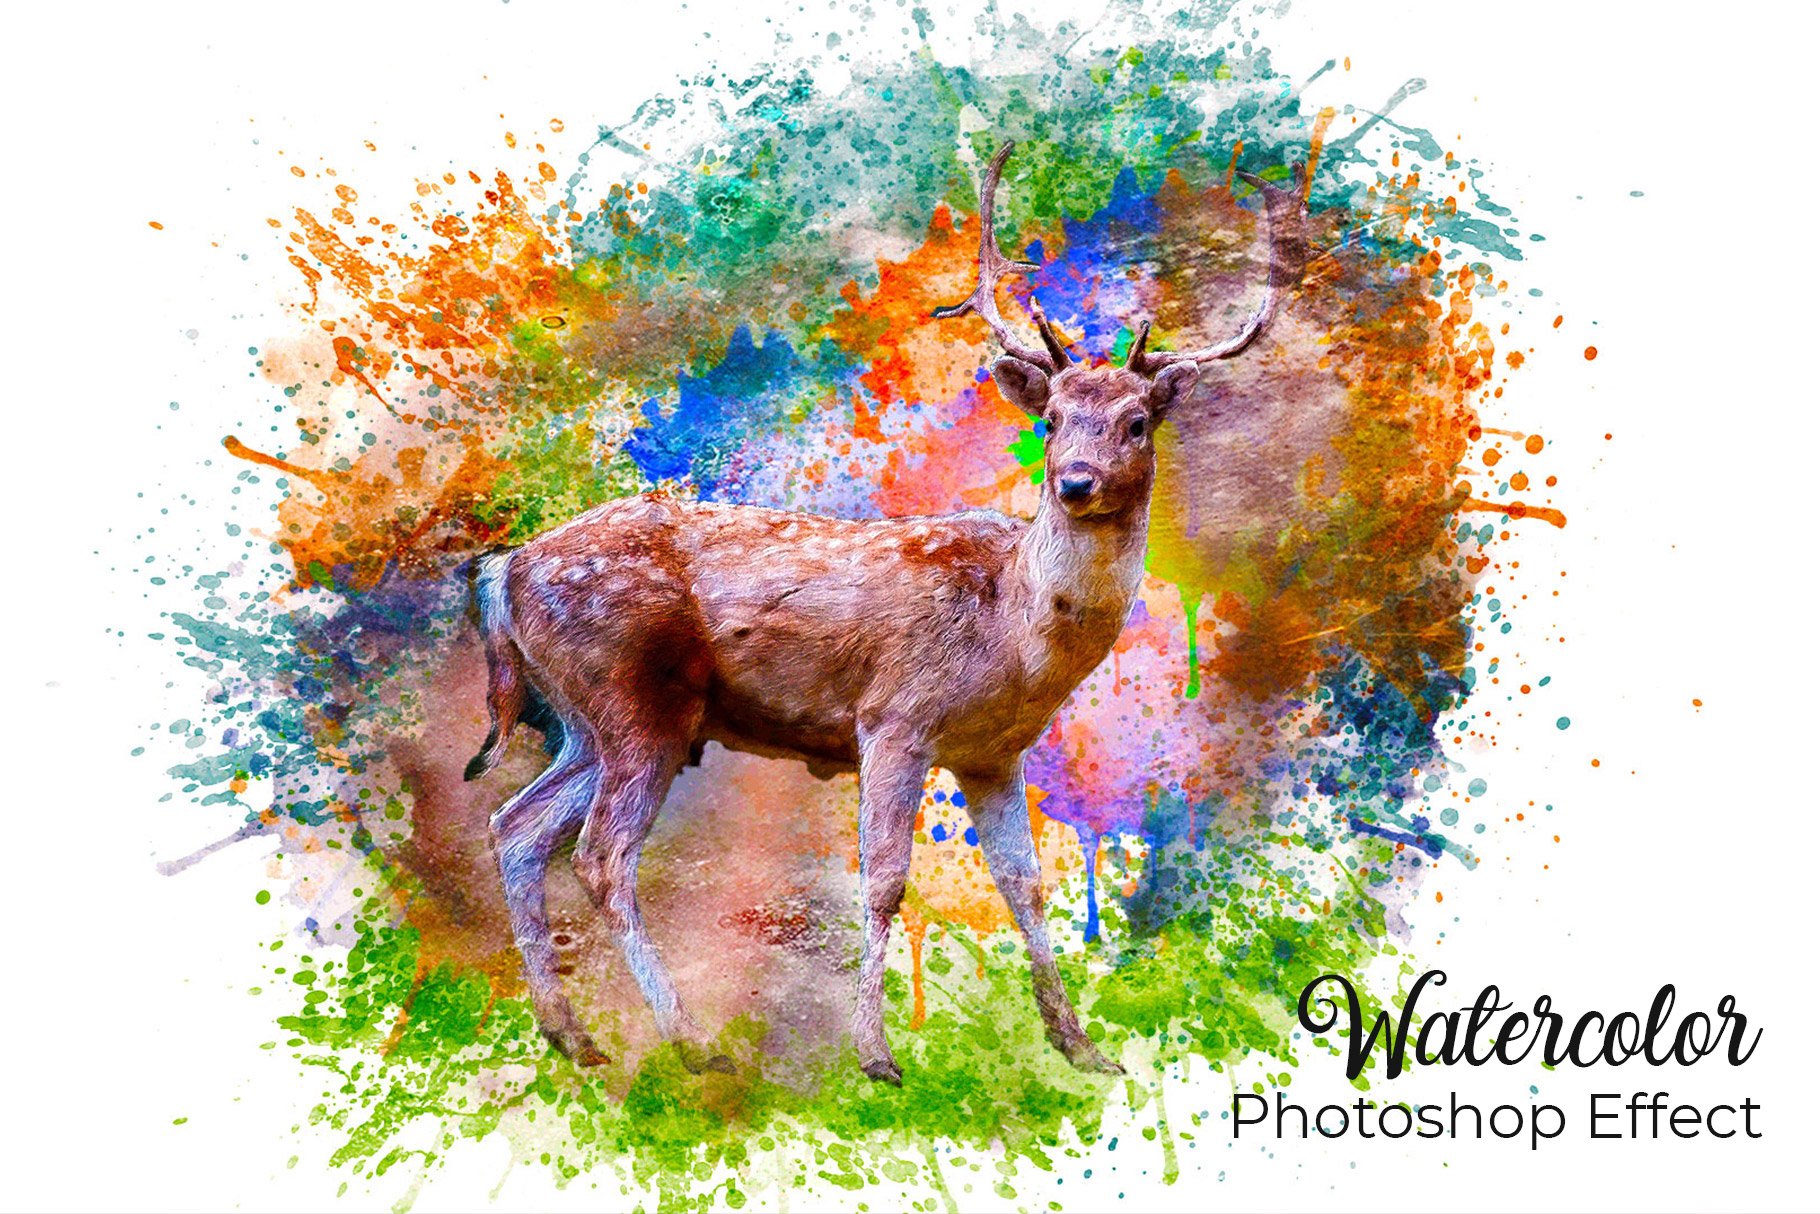 Watercolor Photoshop Effectcover image.